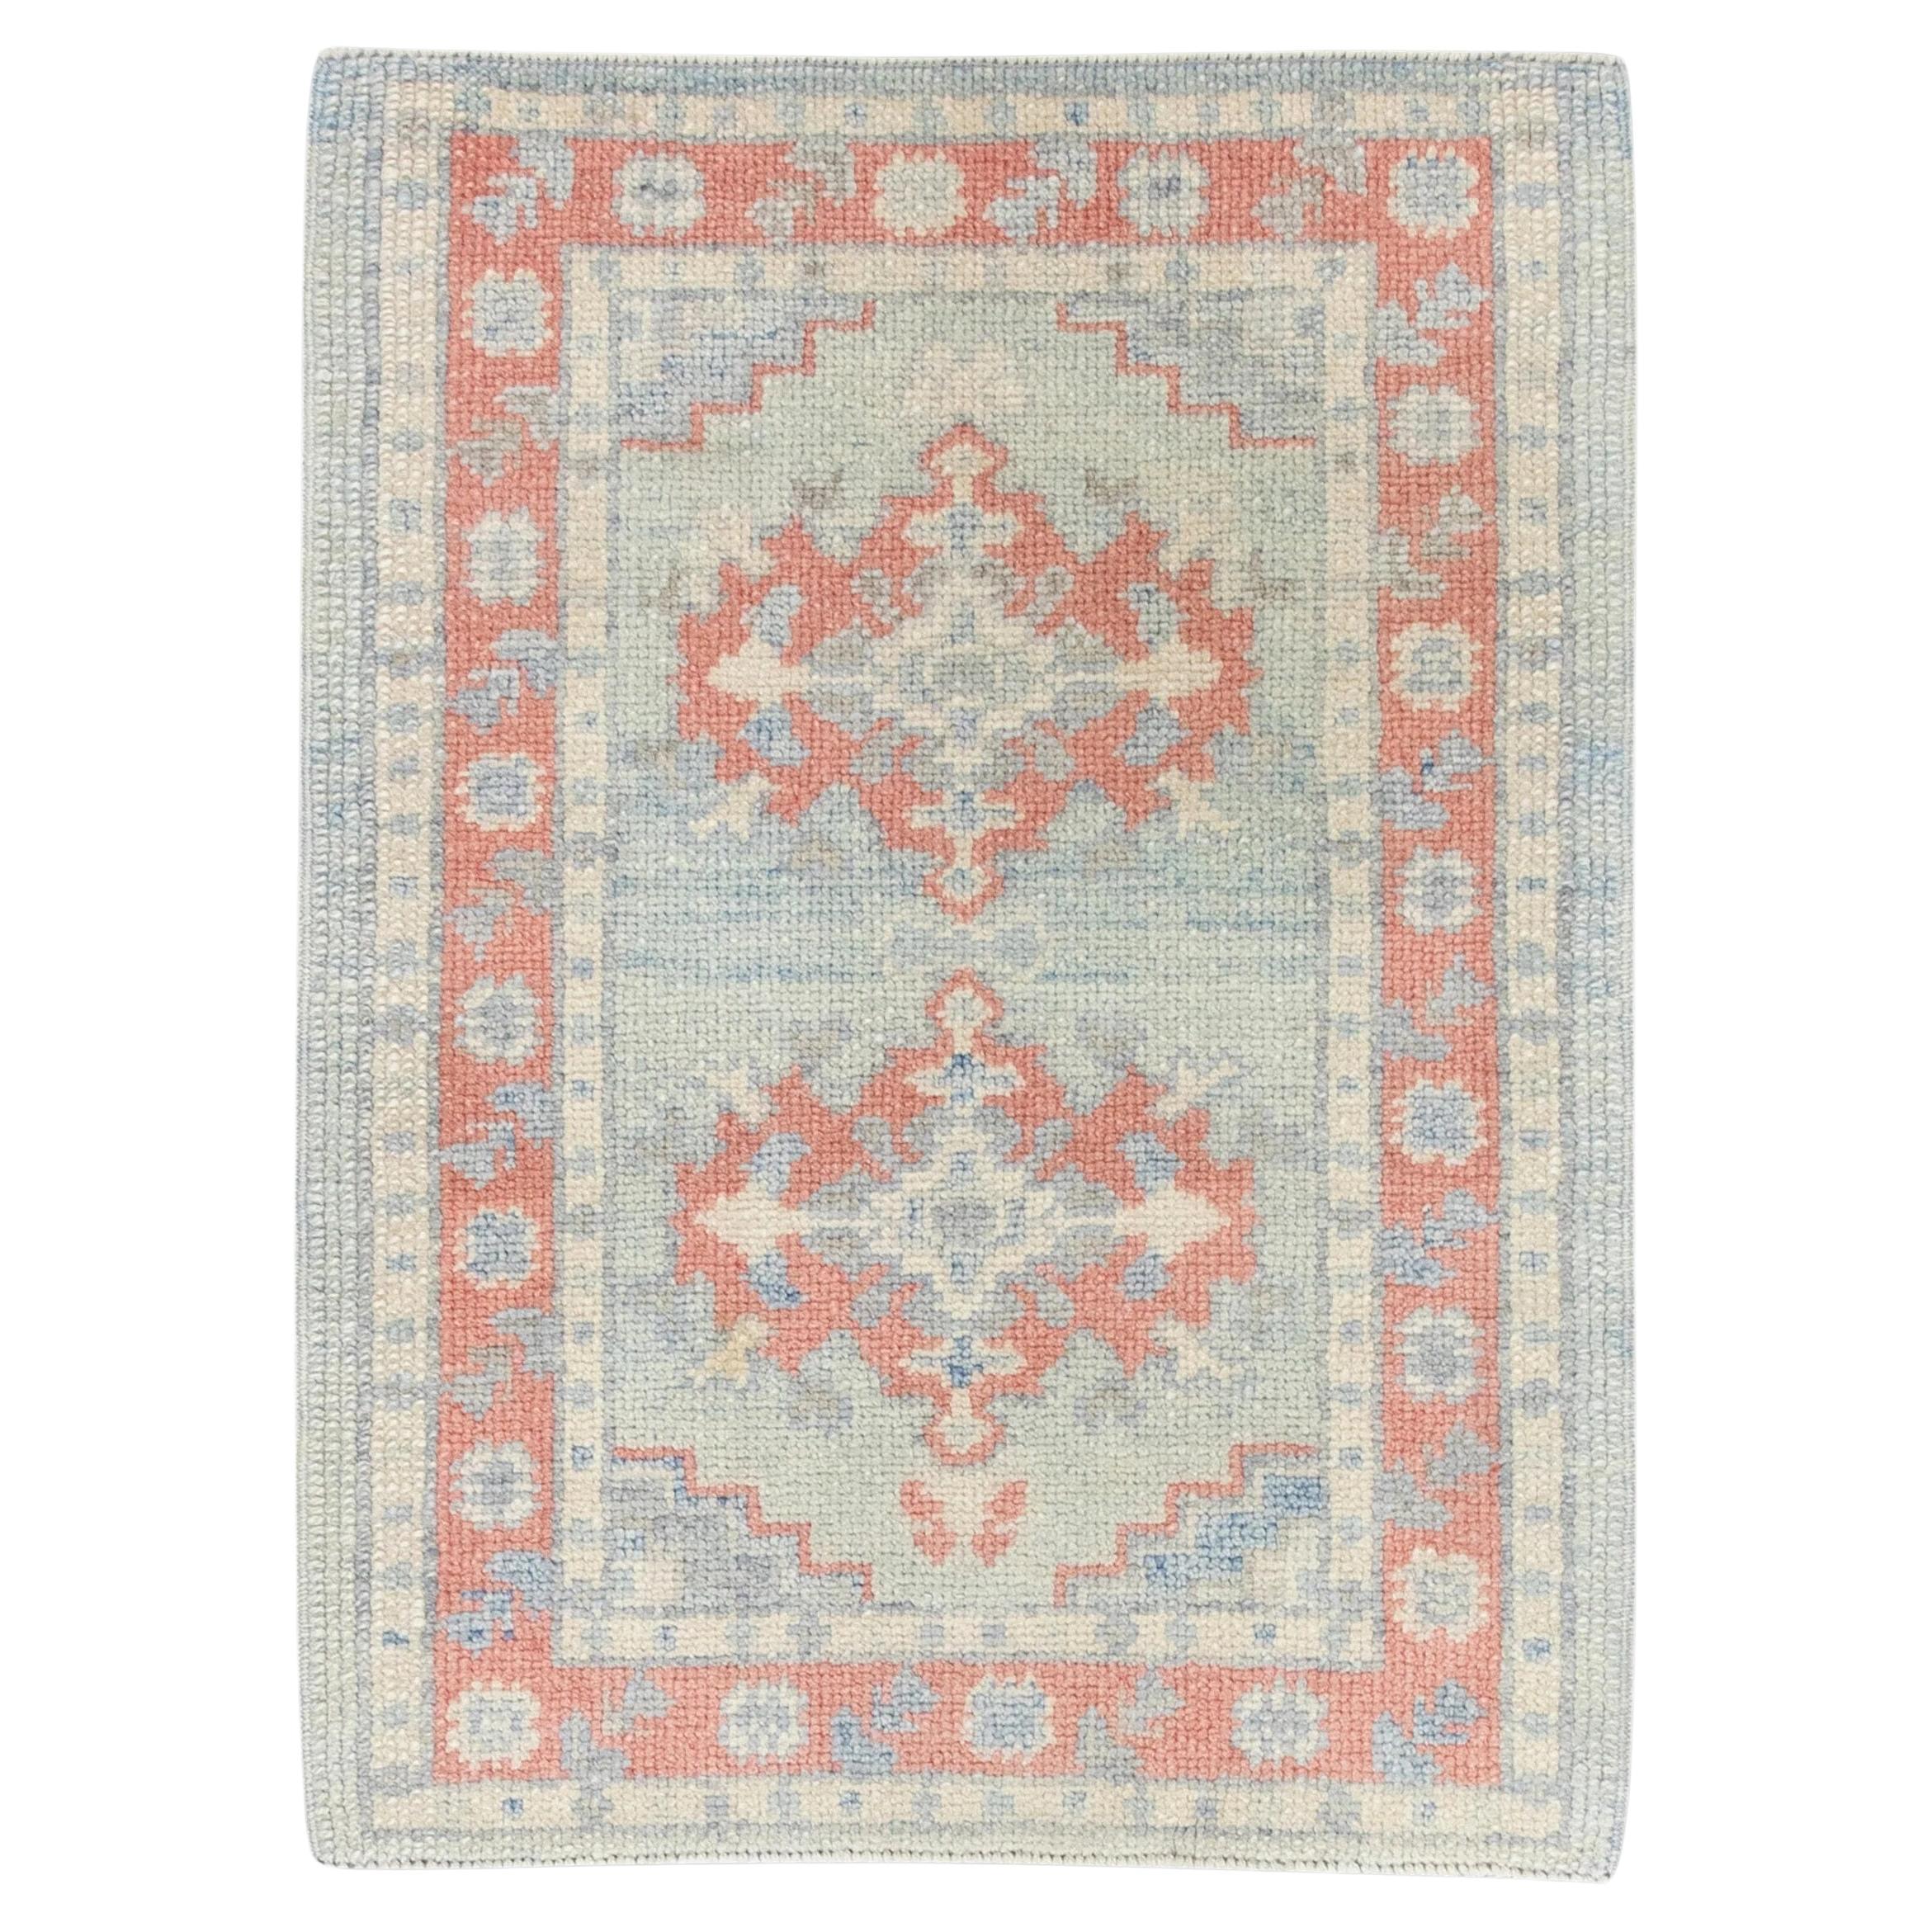 Geometric Design Handwoven Wool Turkish Oushak Rug in Blue and Pink 2'4" x 3'2"